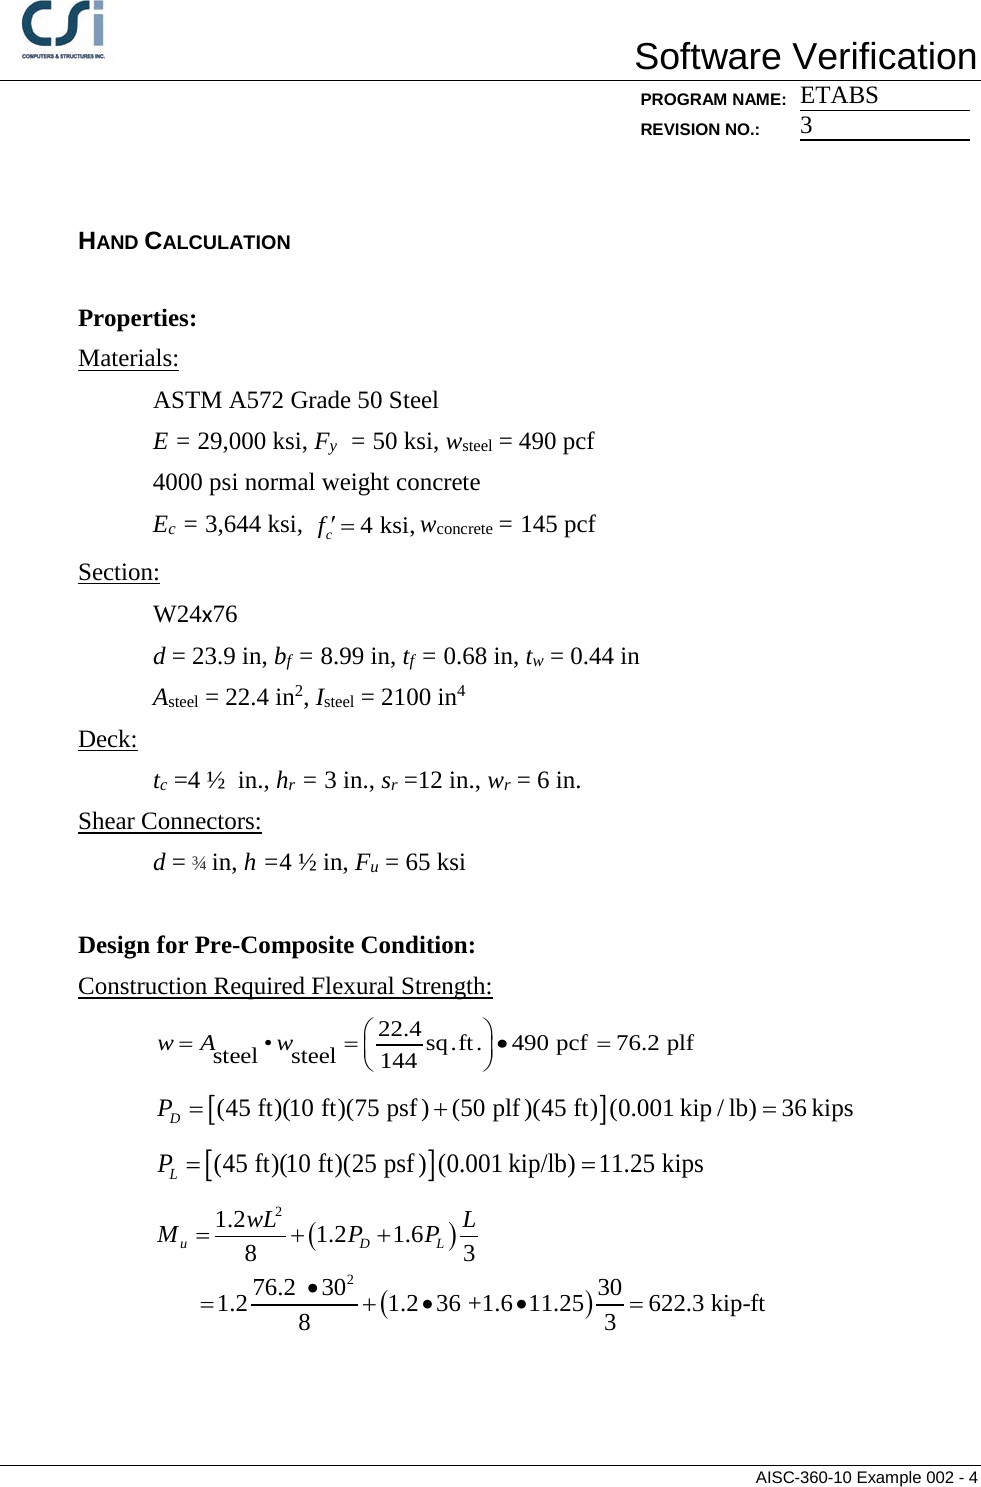 Page 4 of 8 - Contents AISC-360-10 Example 002